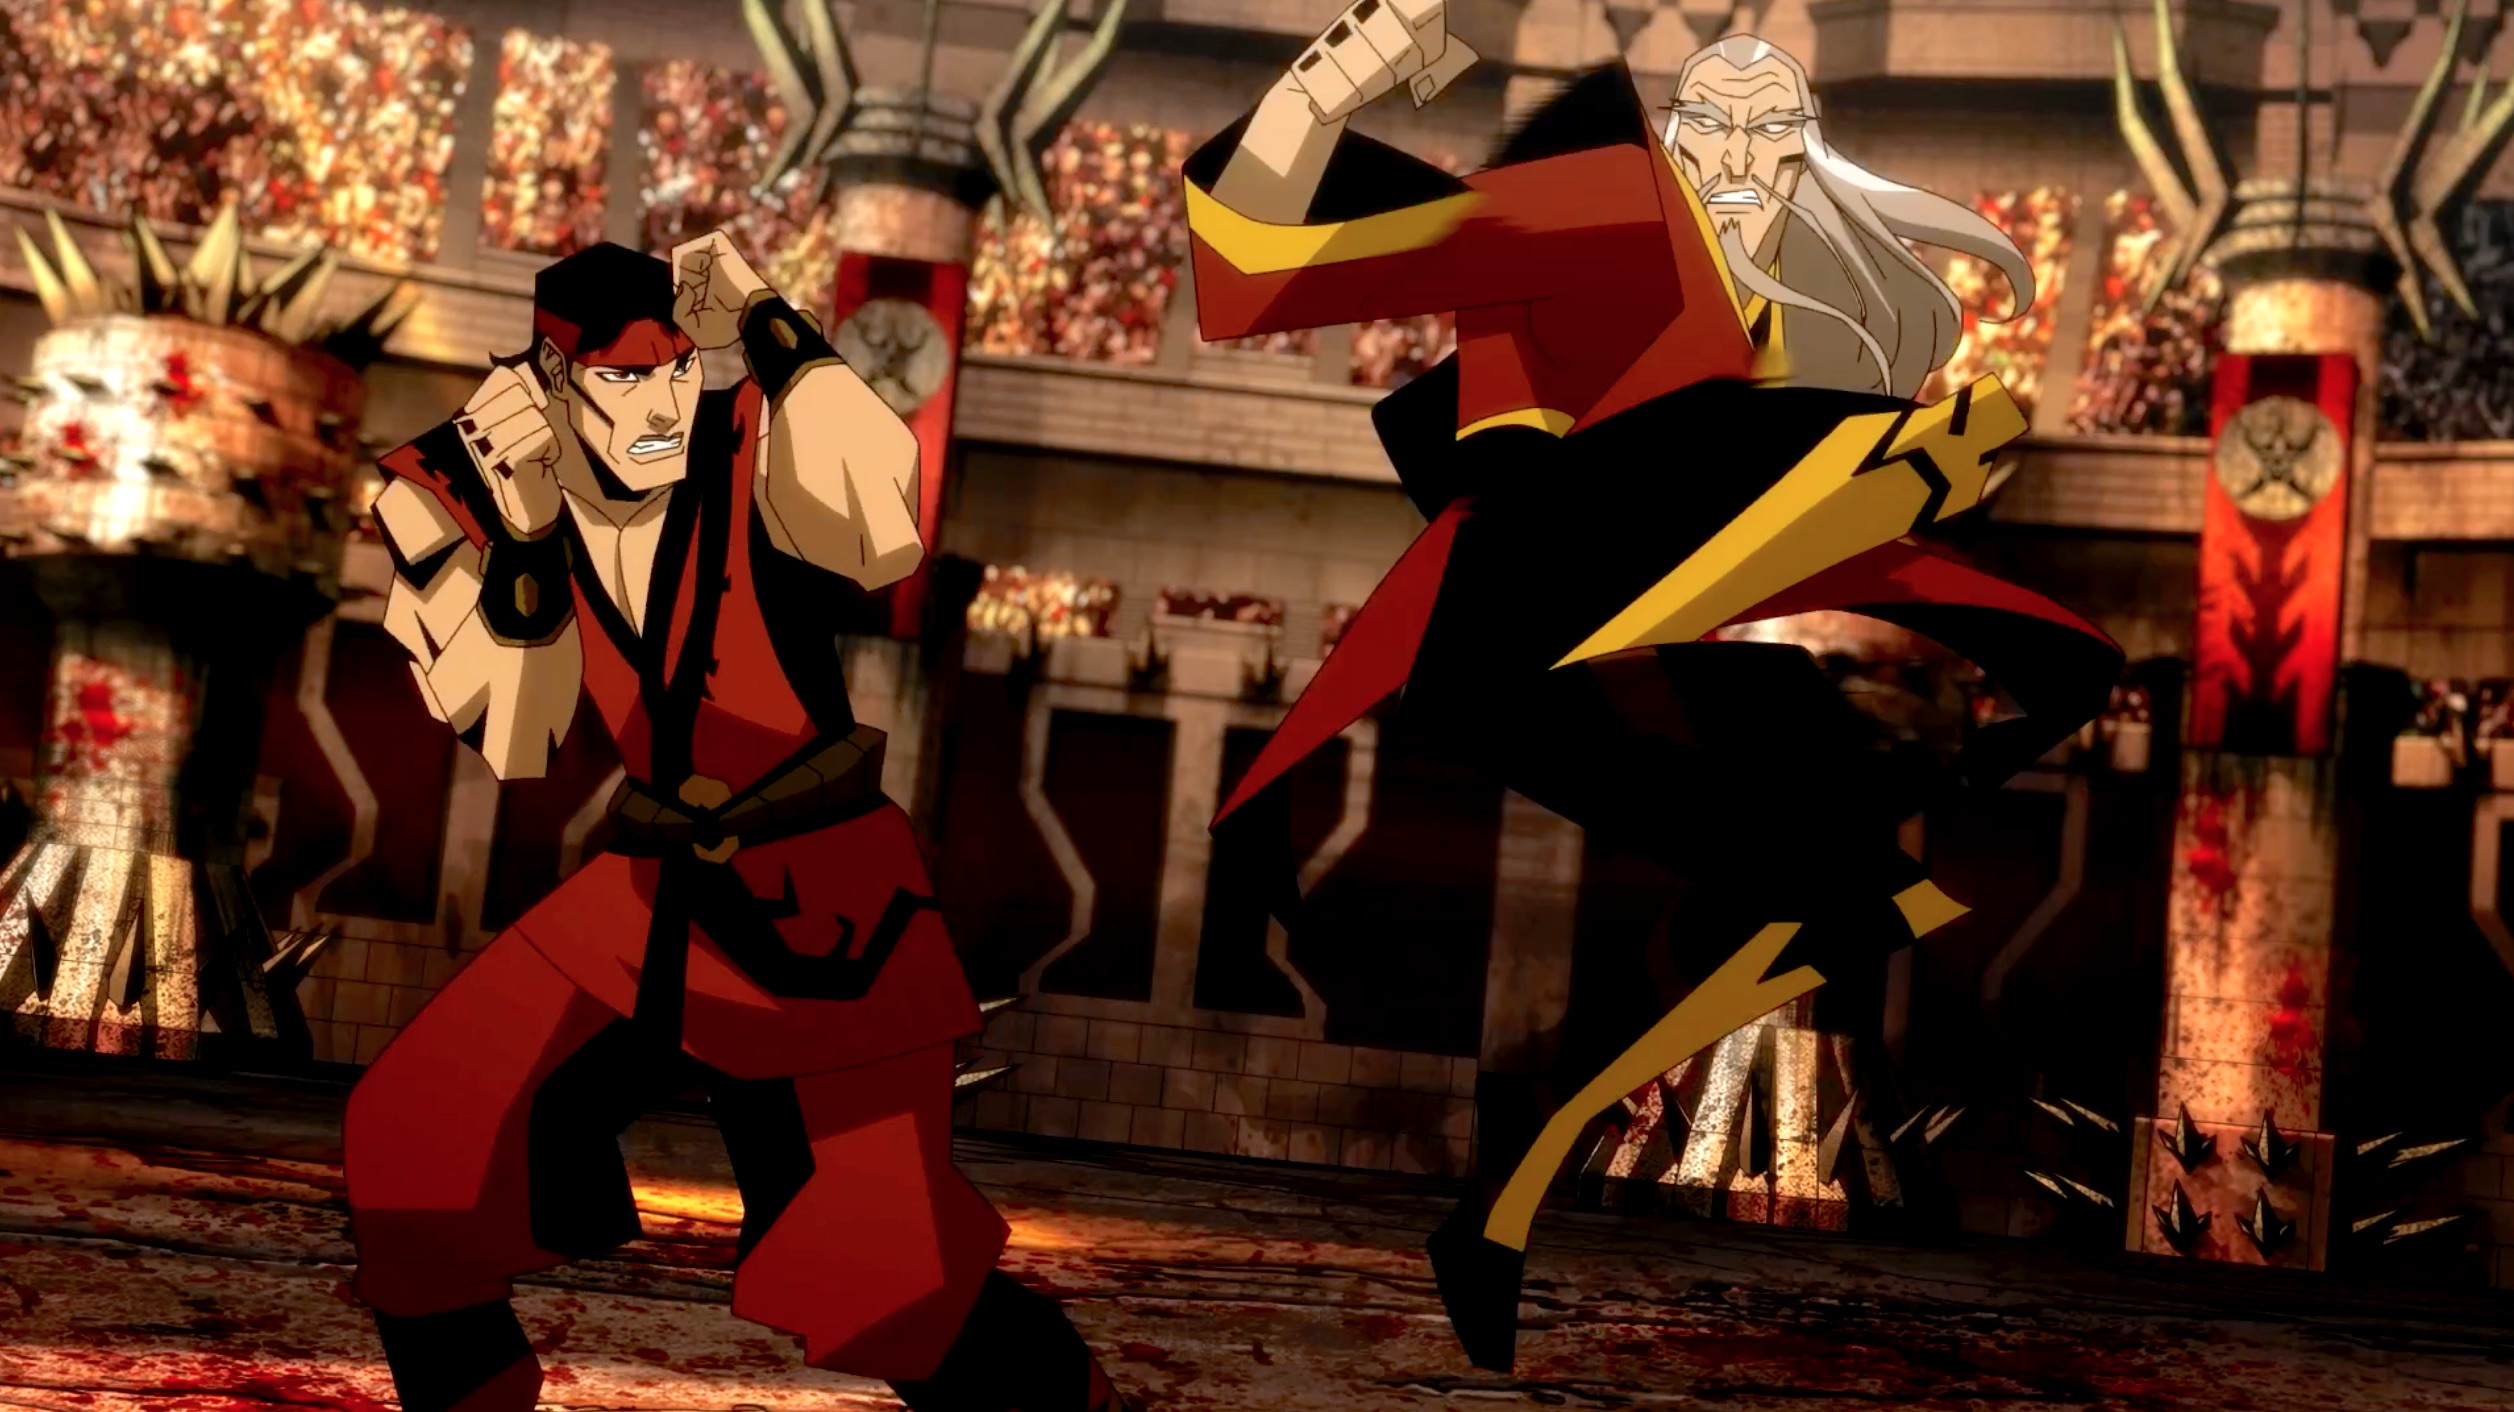 Action Intensifies In New Image From Mortal Kombat Legends: Battle Of The Realms